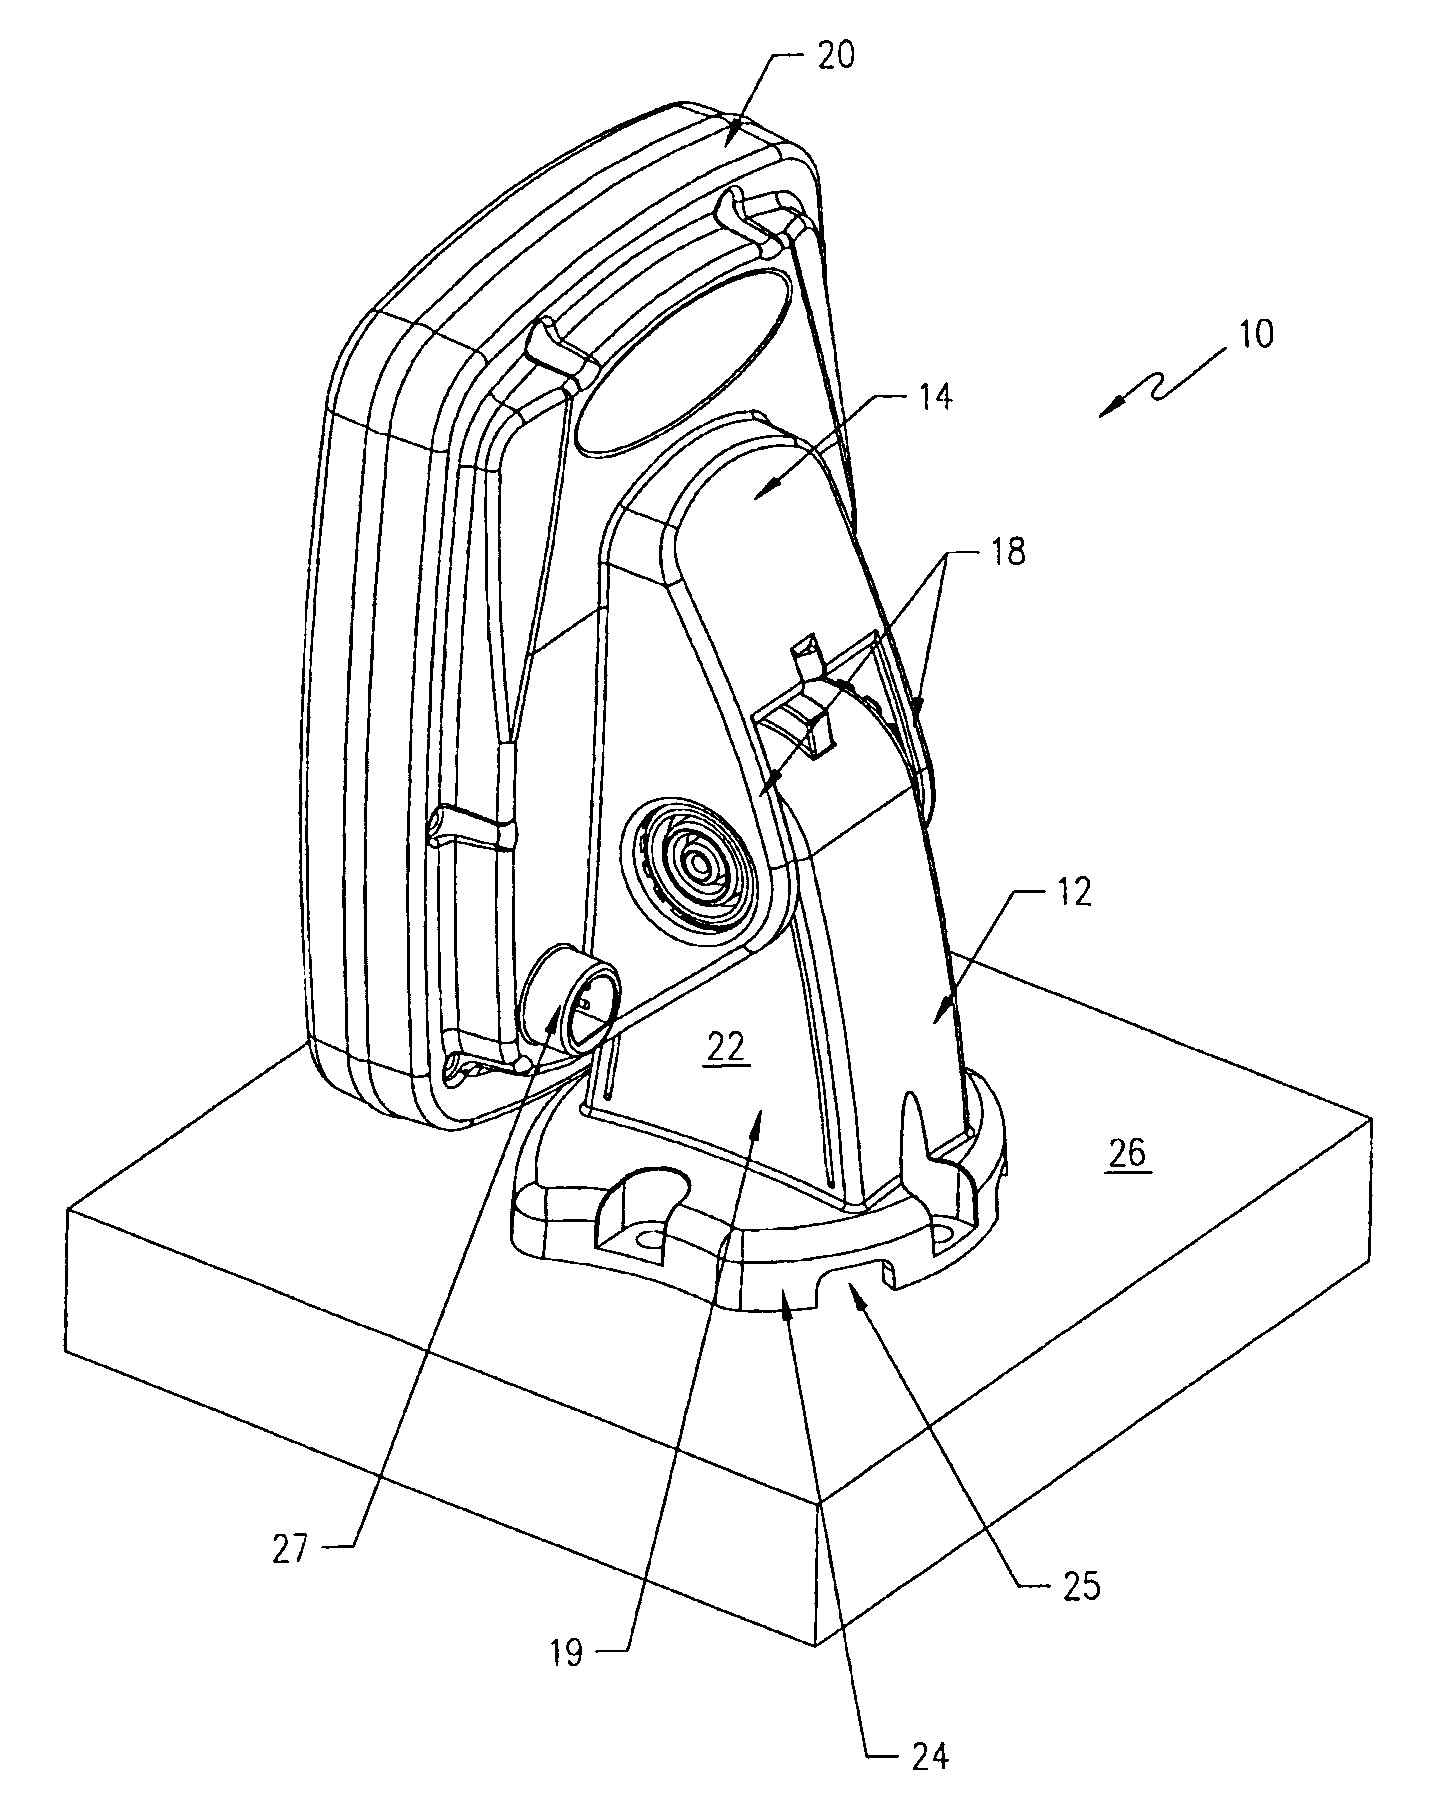 Mounting assembly